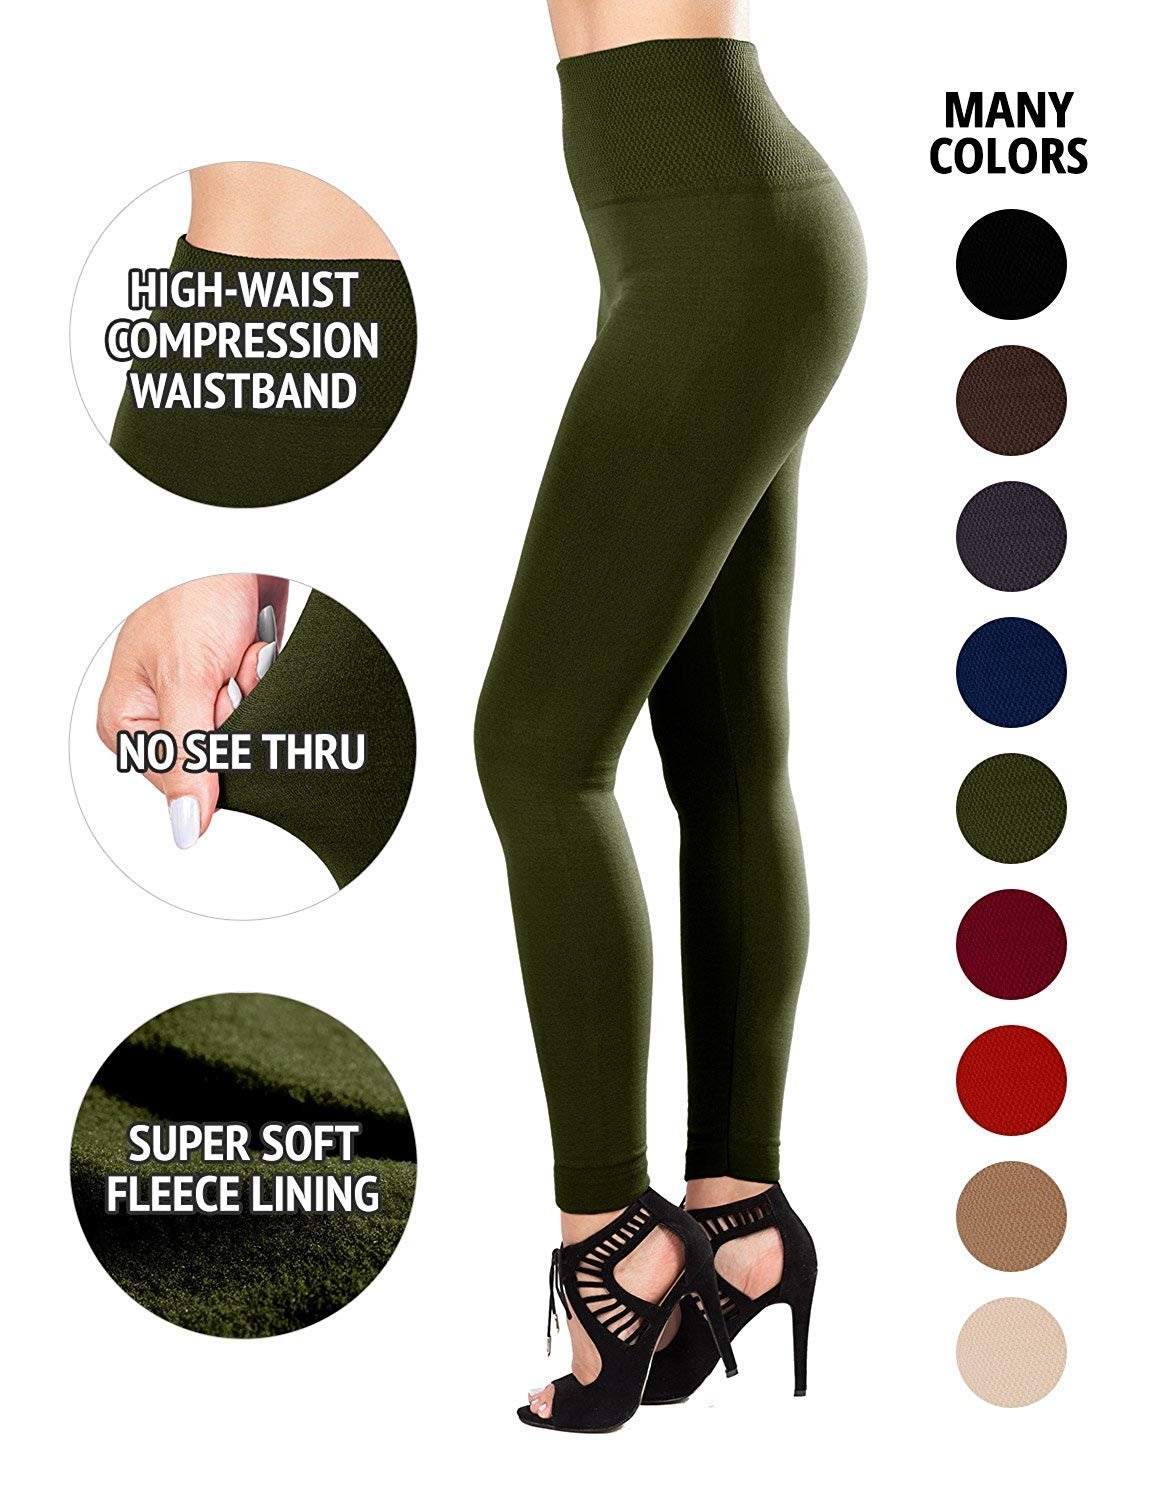 SATINA High Waisted Leggings for Women | Tummy Control & Compression Waistband (One Size (High Waist), Olive)